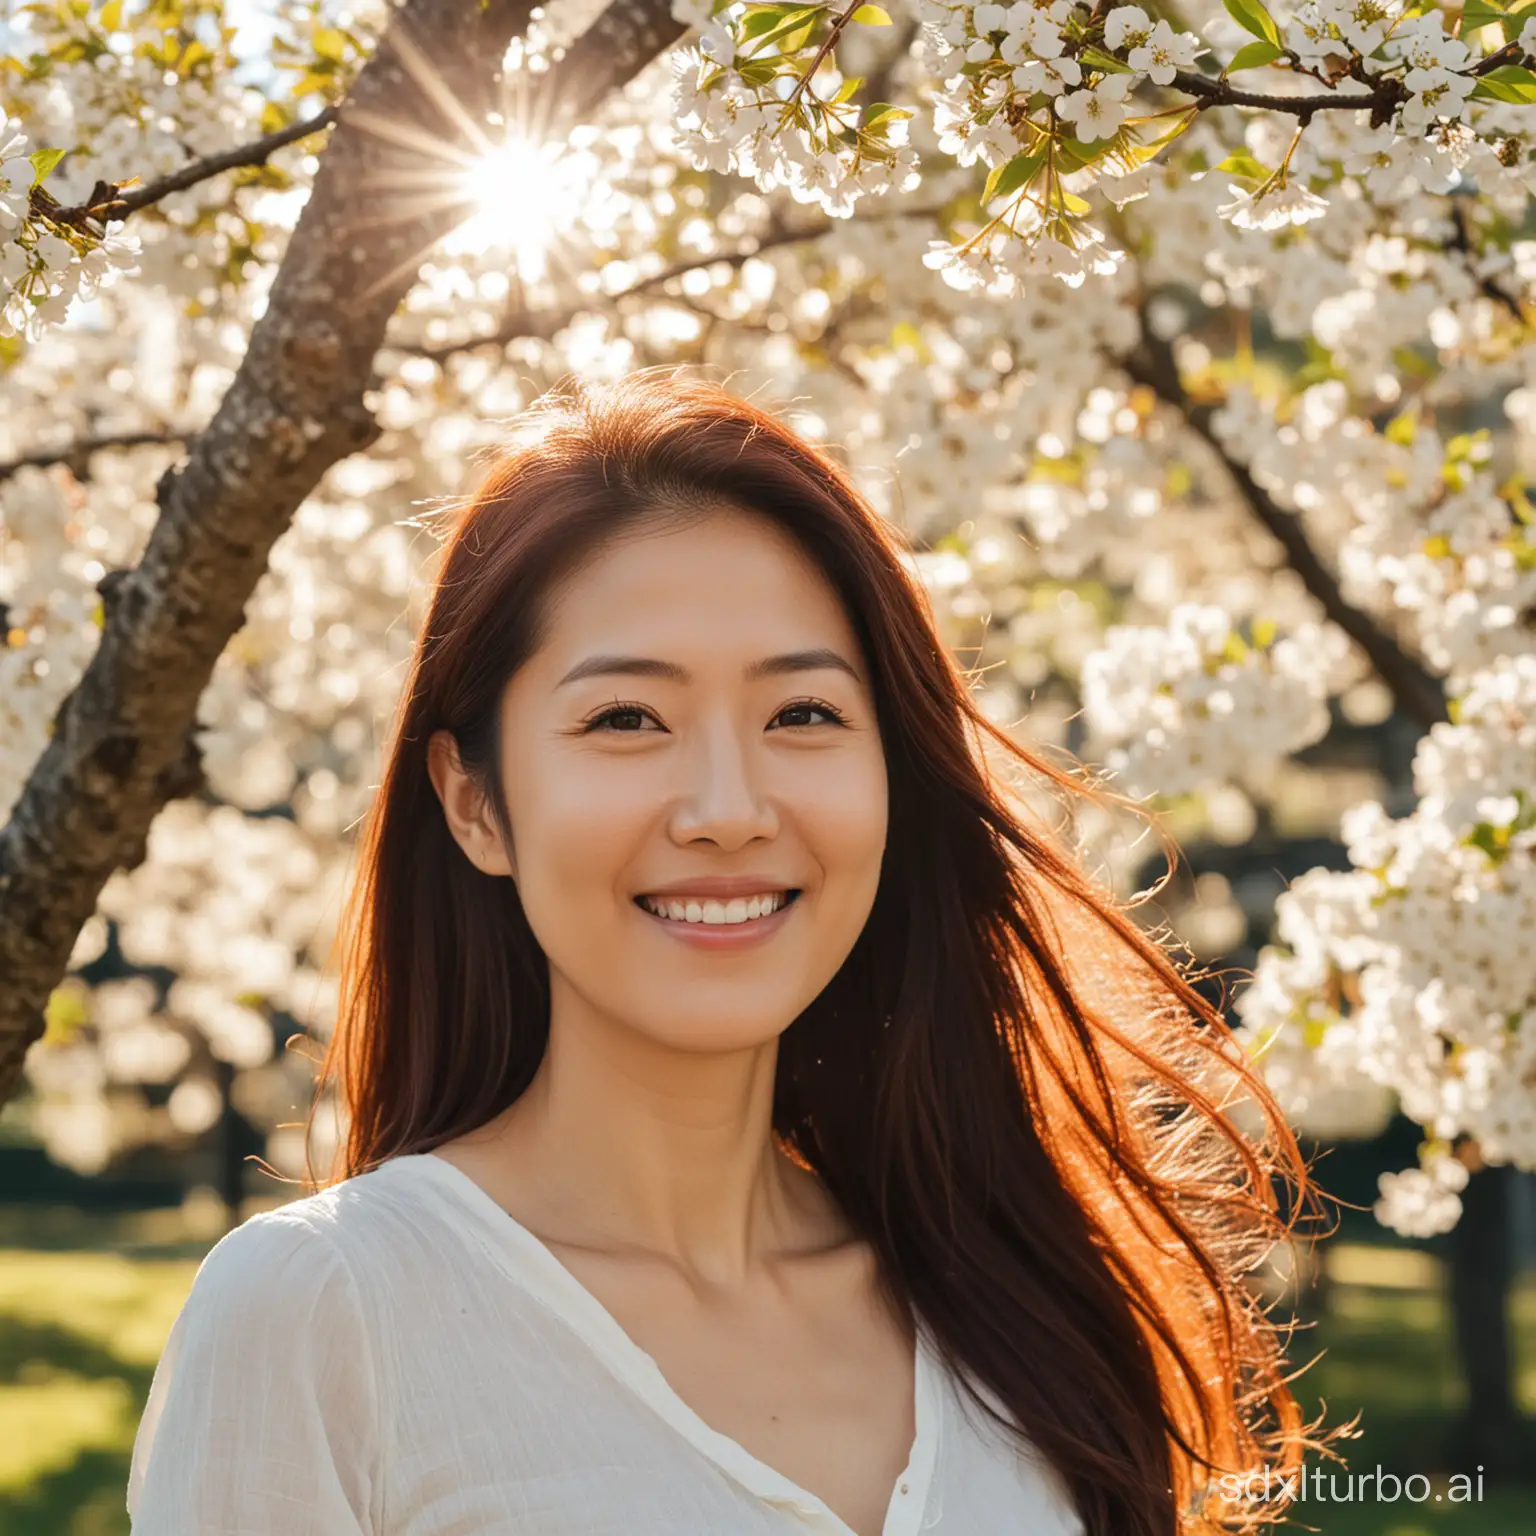 Japanese-Woman-Smiling-under-Cherry-Blossom-Tree-in-Sunlight